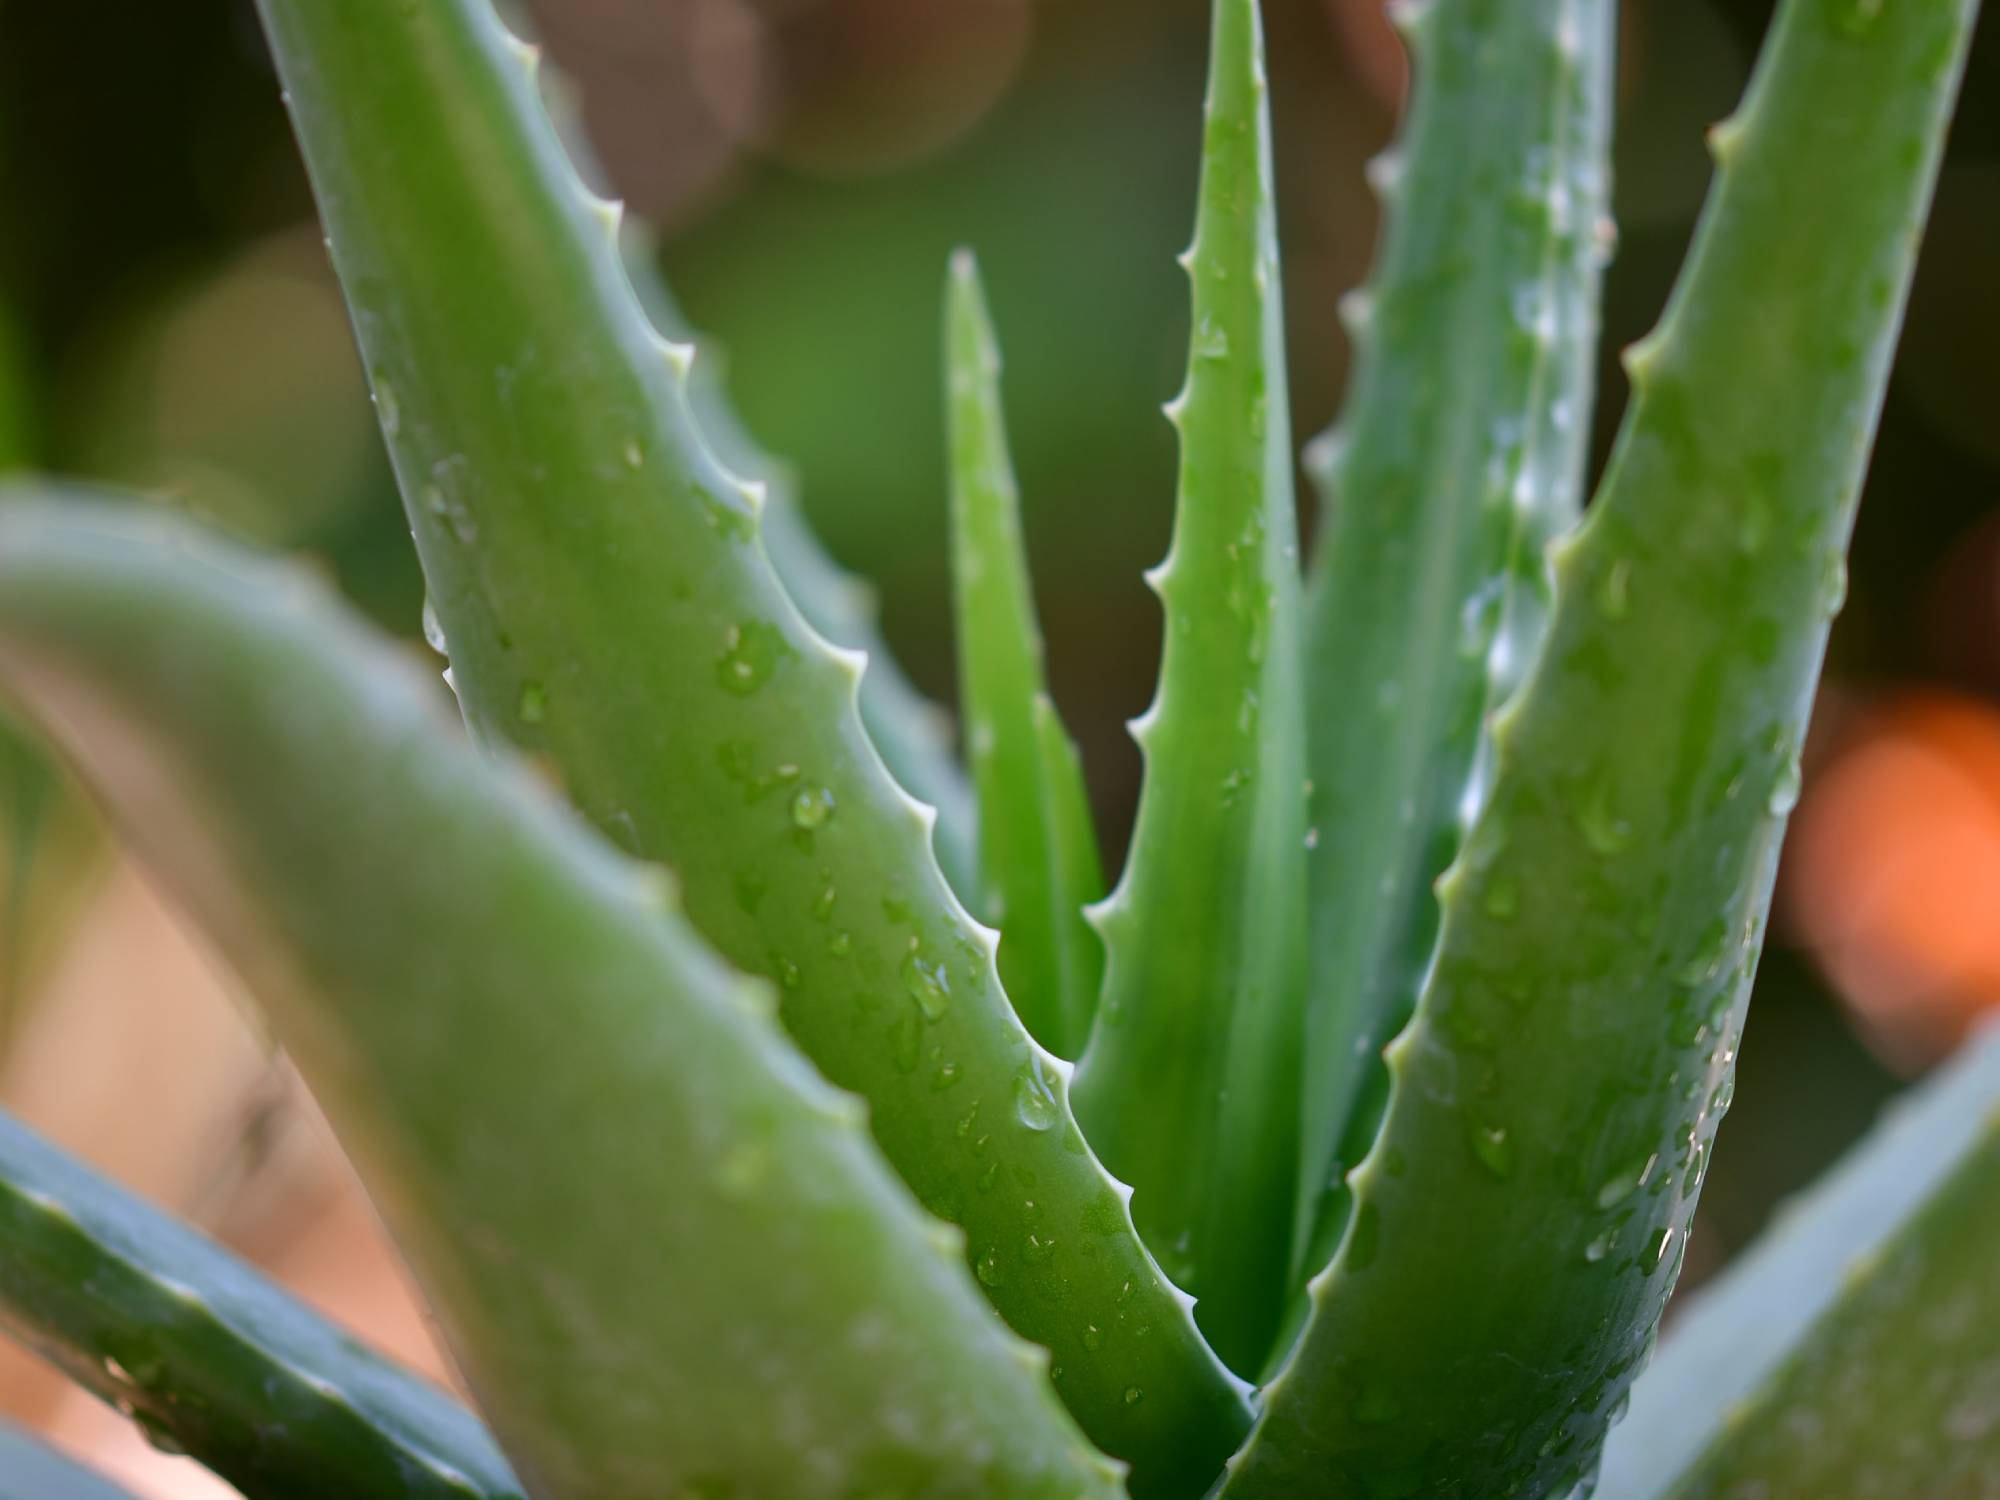 How to grow, harvest, preserve, and use aloe vera